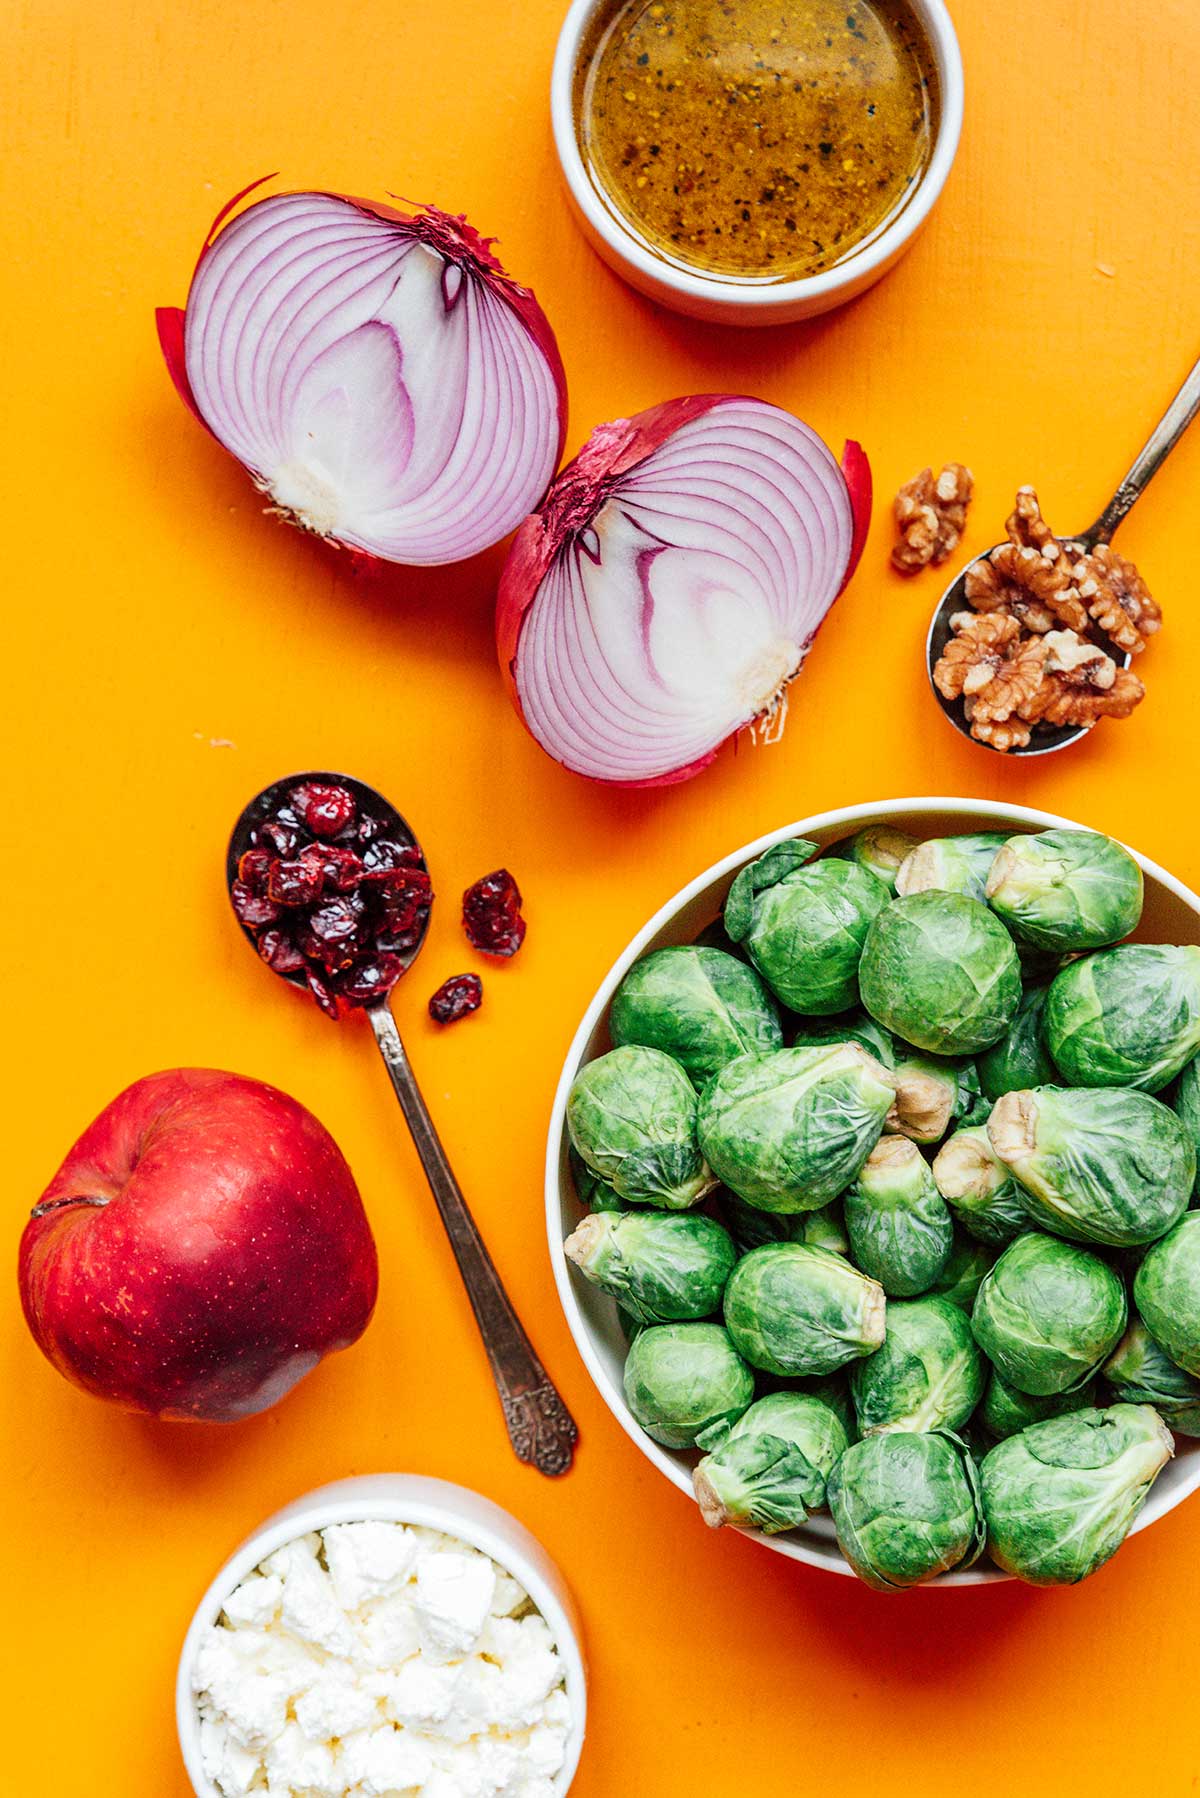 Various roasted Brussels sprout salad ingredients including vinaigrette, red onion, walnuts, Brussels sprouts, apple, and dried cranberries, measured and laid out on an orange background